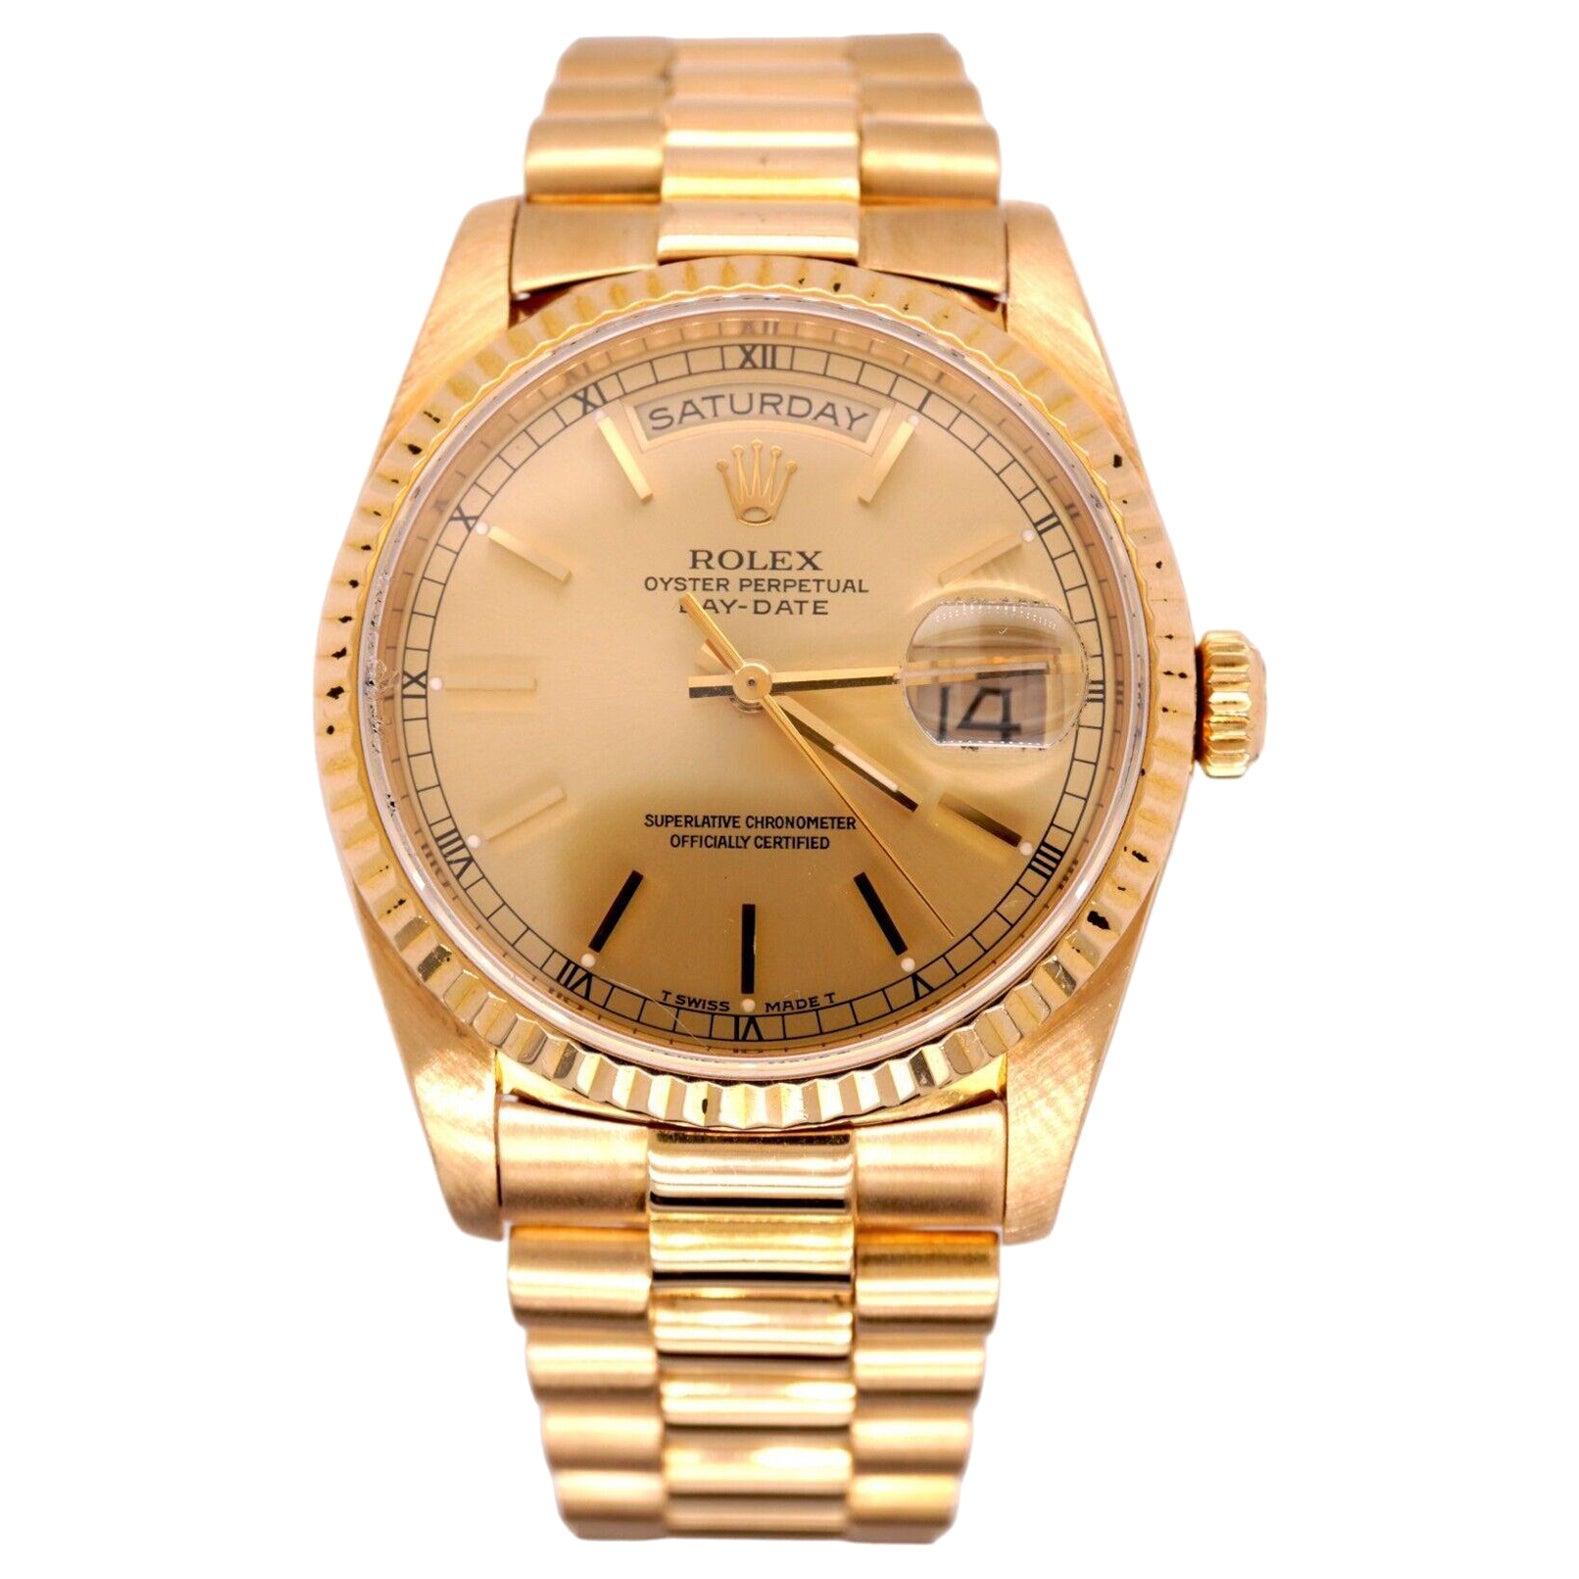 Rolex DAY-DATE 36mm 18K Yellow Gold President Men's Gold Dial Watch Ref: 18238 For Sale